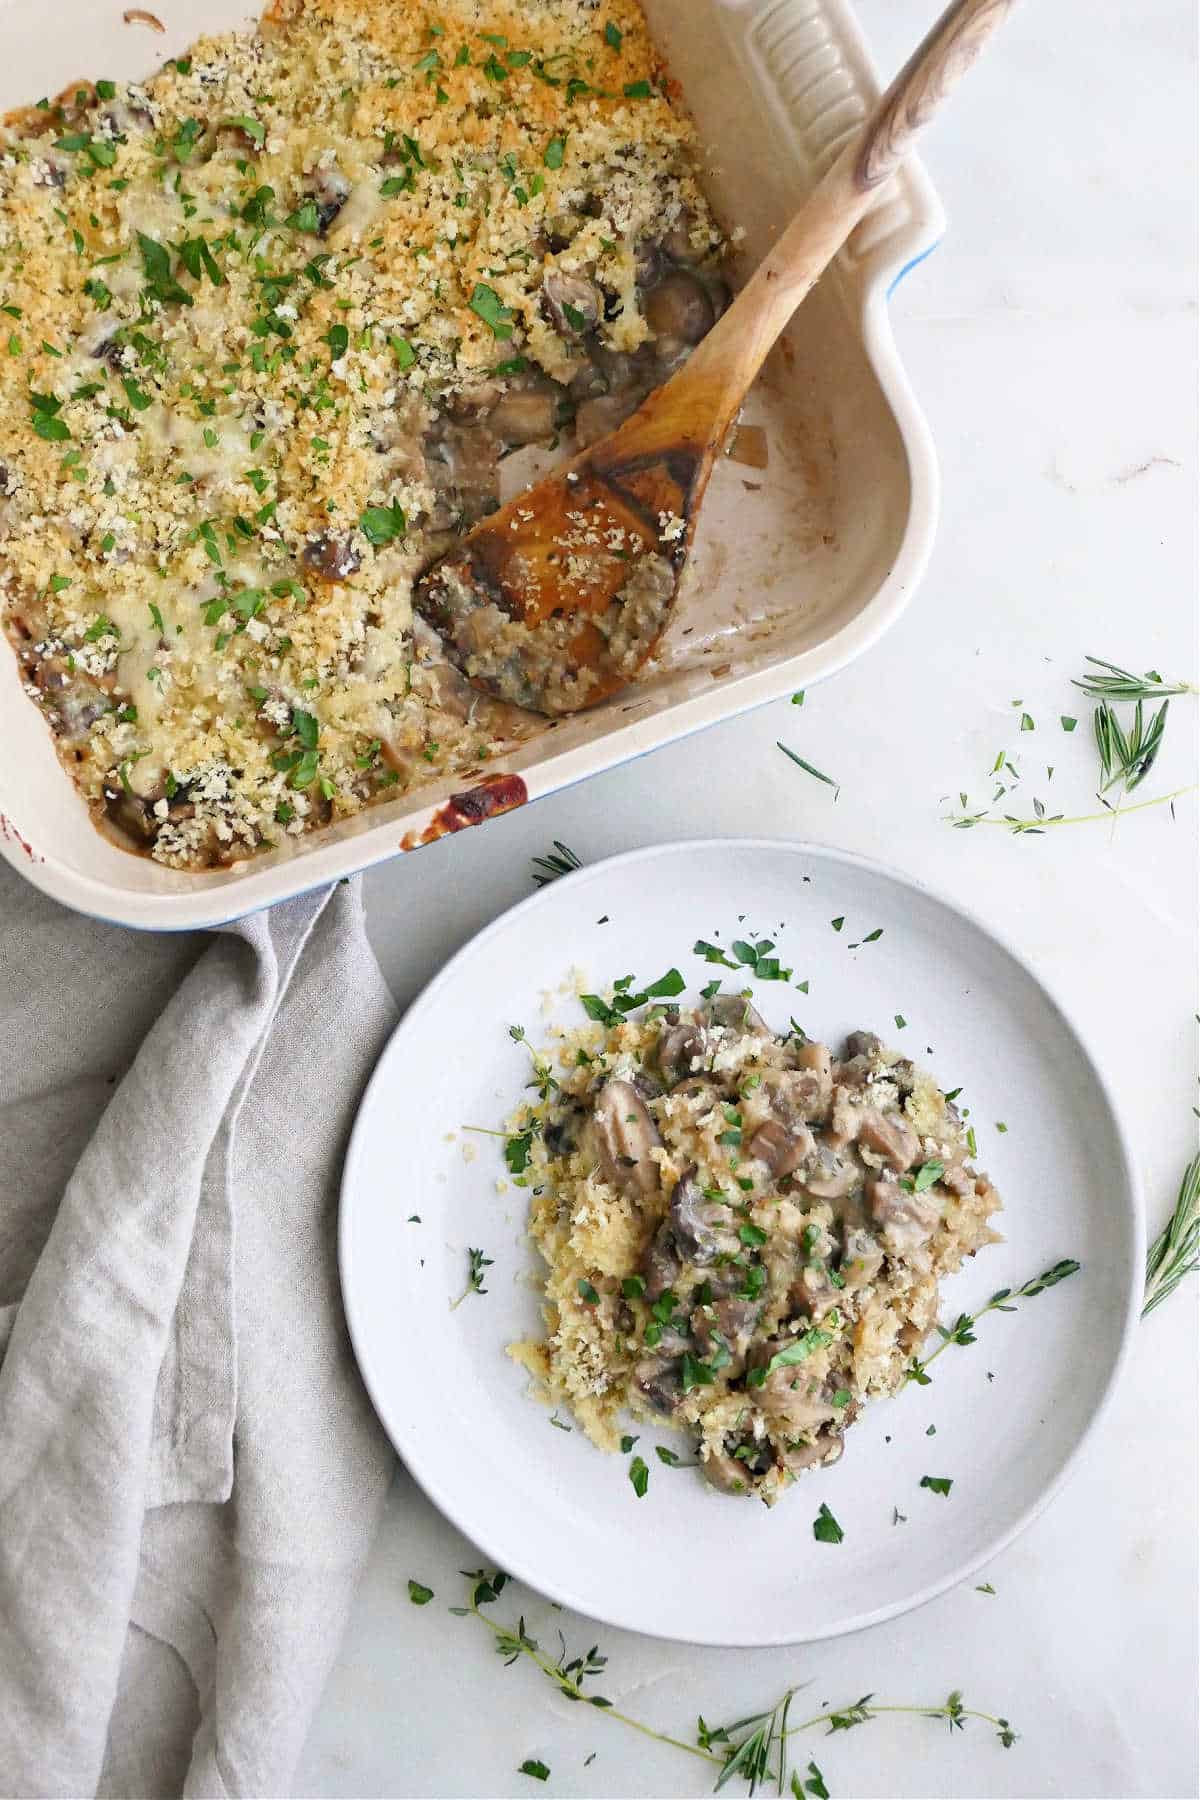 mushroom gratin in a dish next to plate with a serving